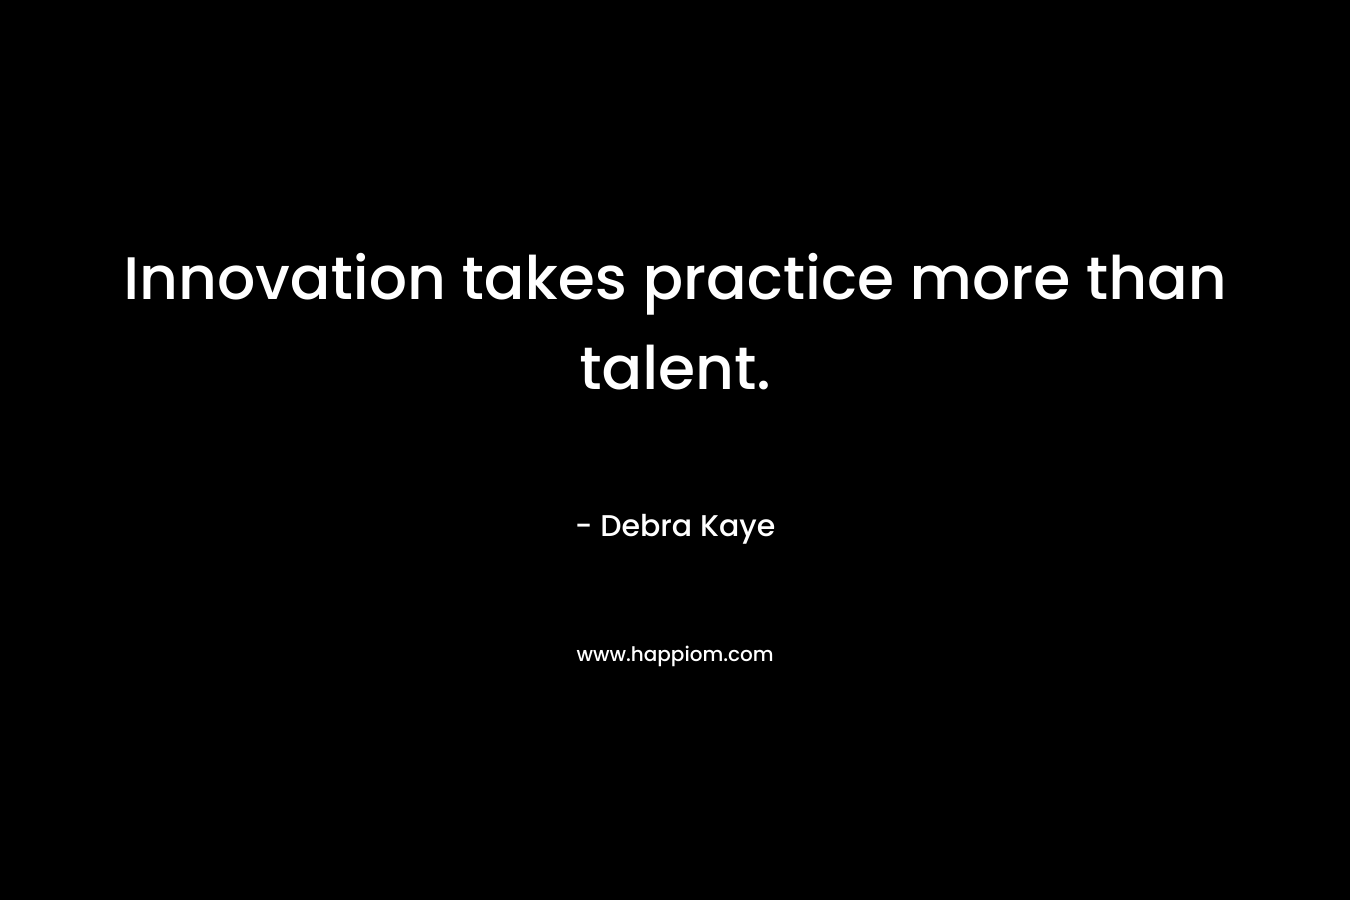 Innovation takes practice more than talent.